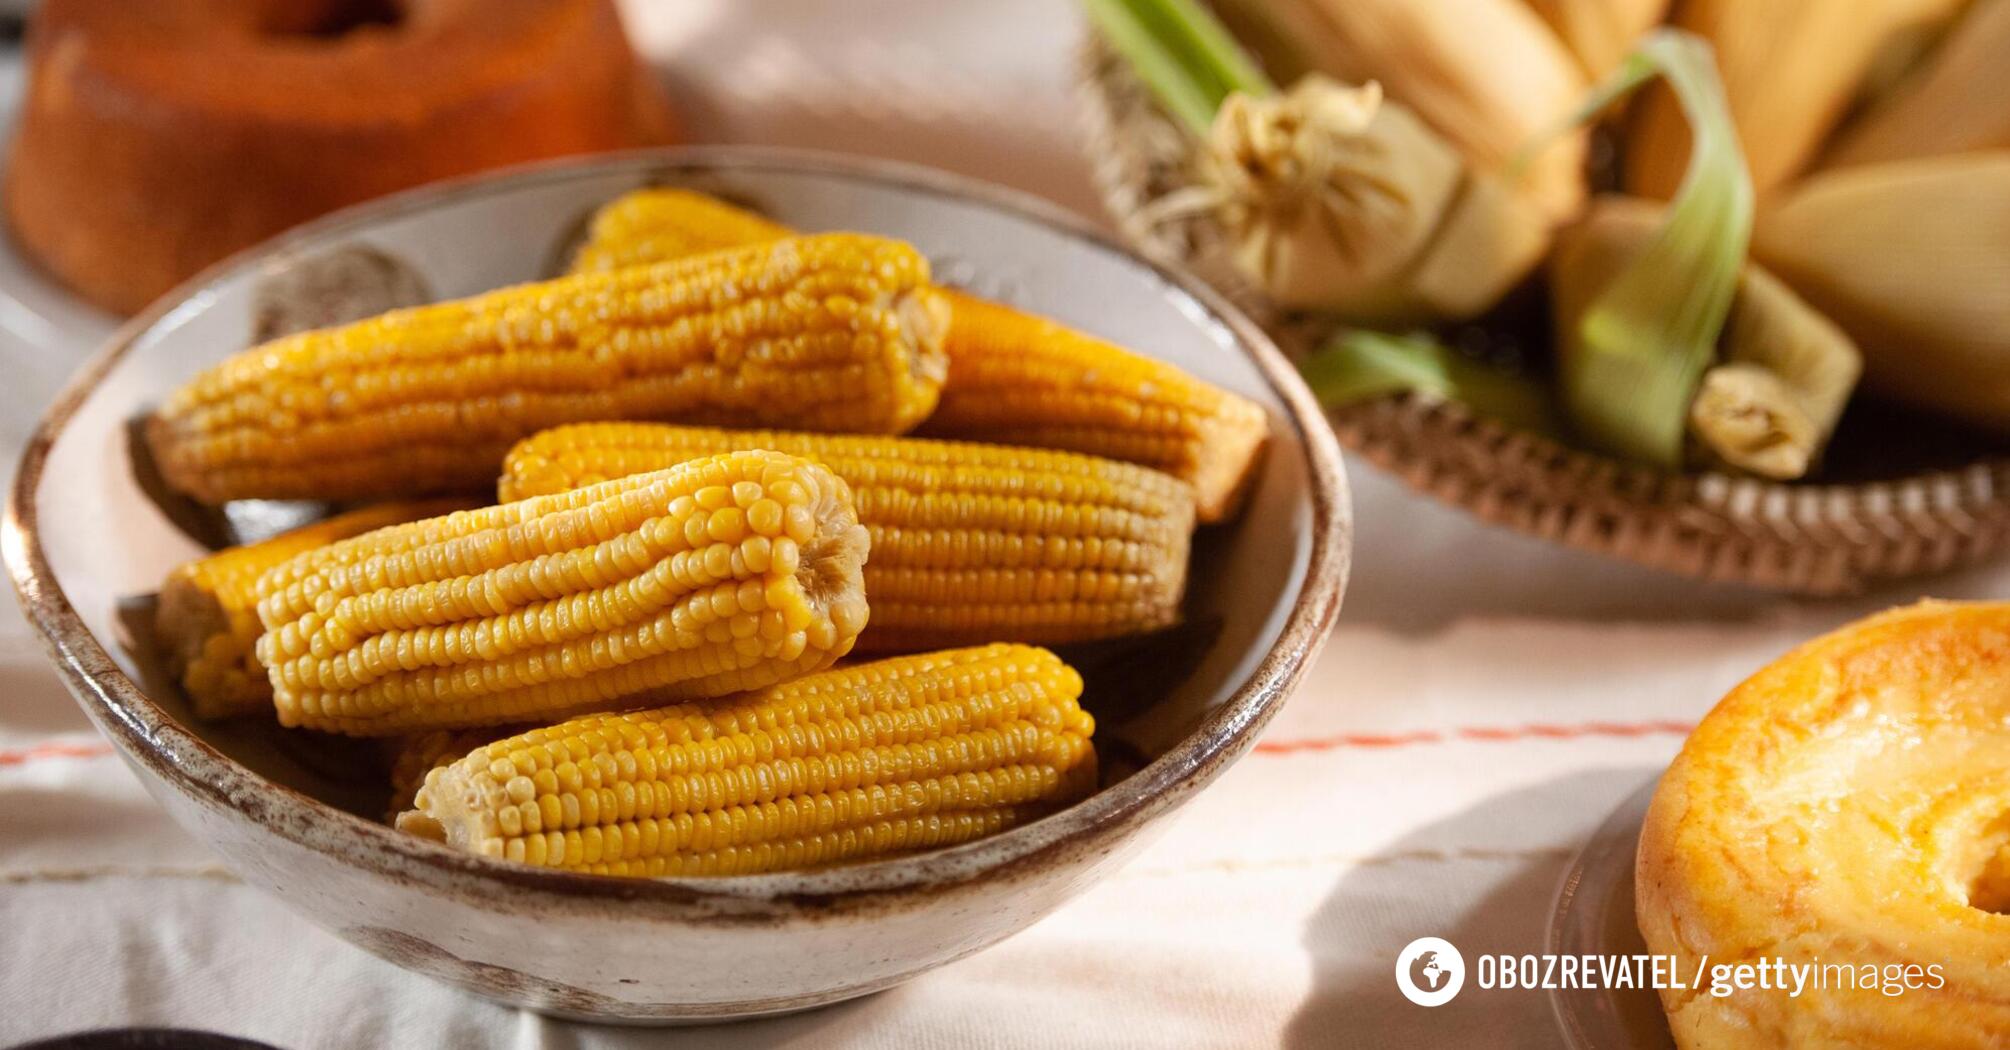 Corn reduces the risk of cardiovascular disease